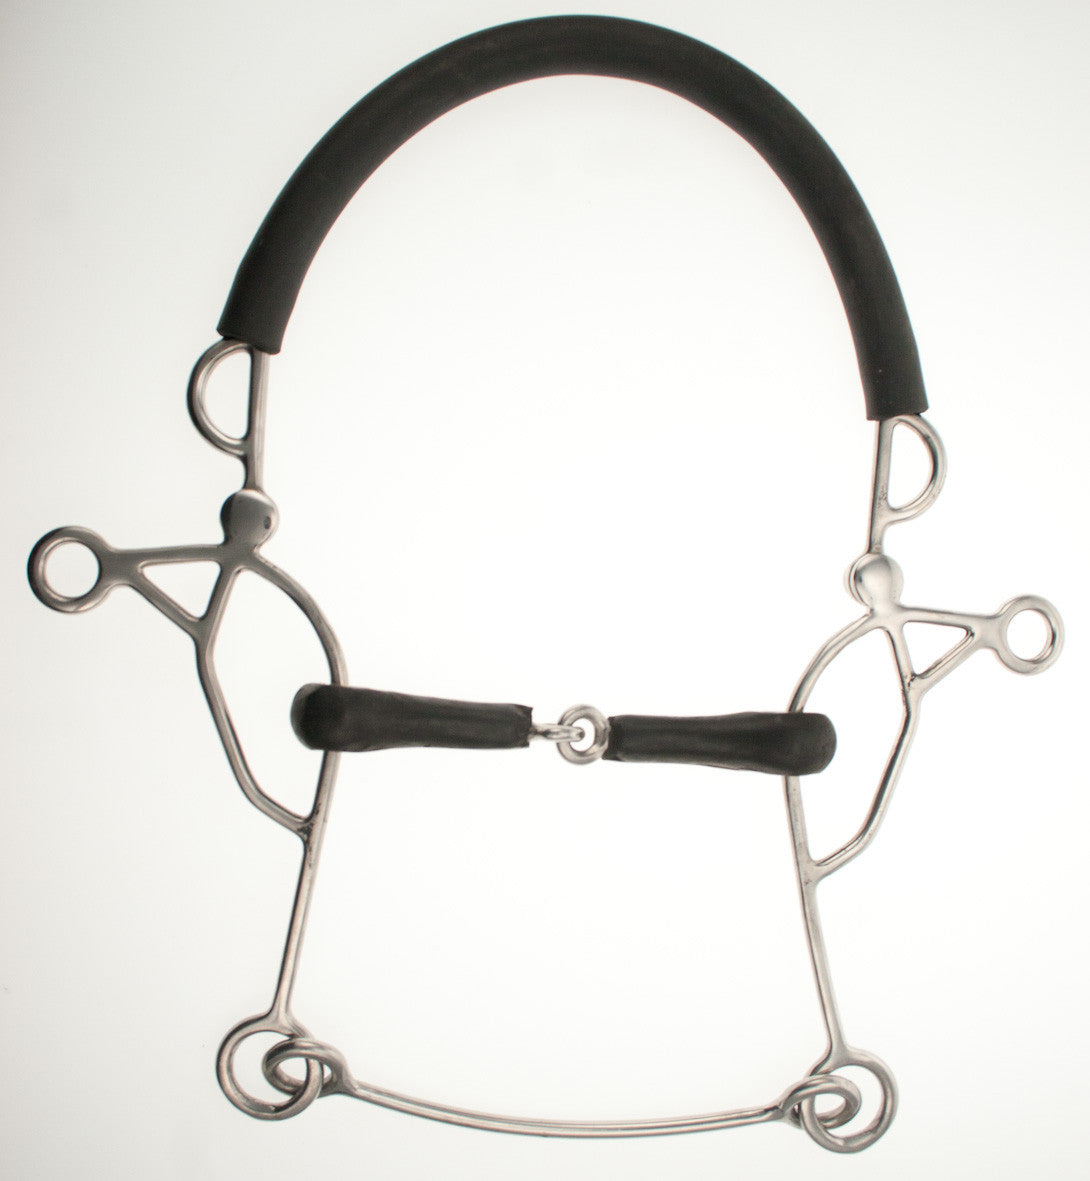 Abbey England Combination Rubber Jointed Hackamore - The Tack Shop of Lexington